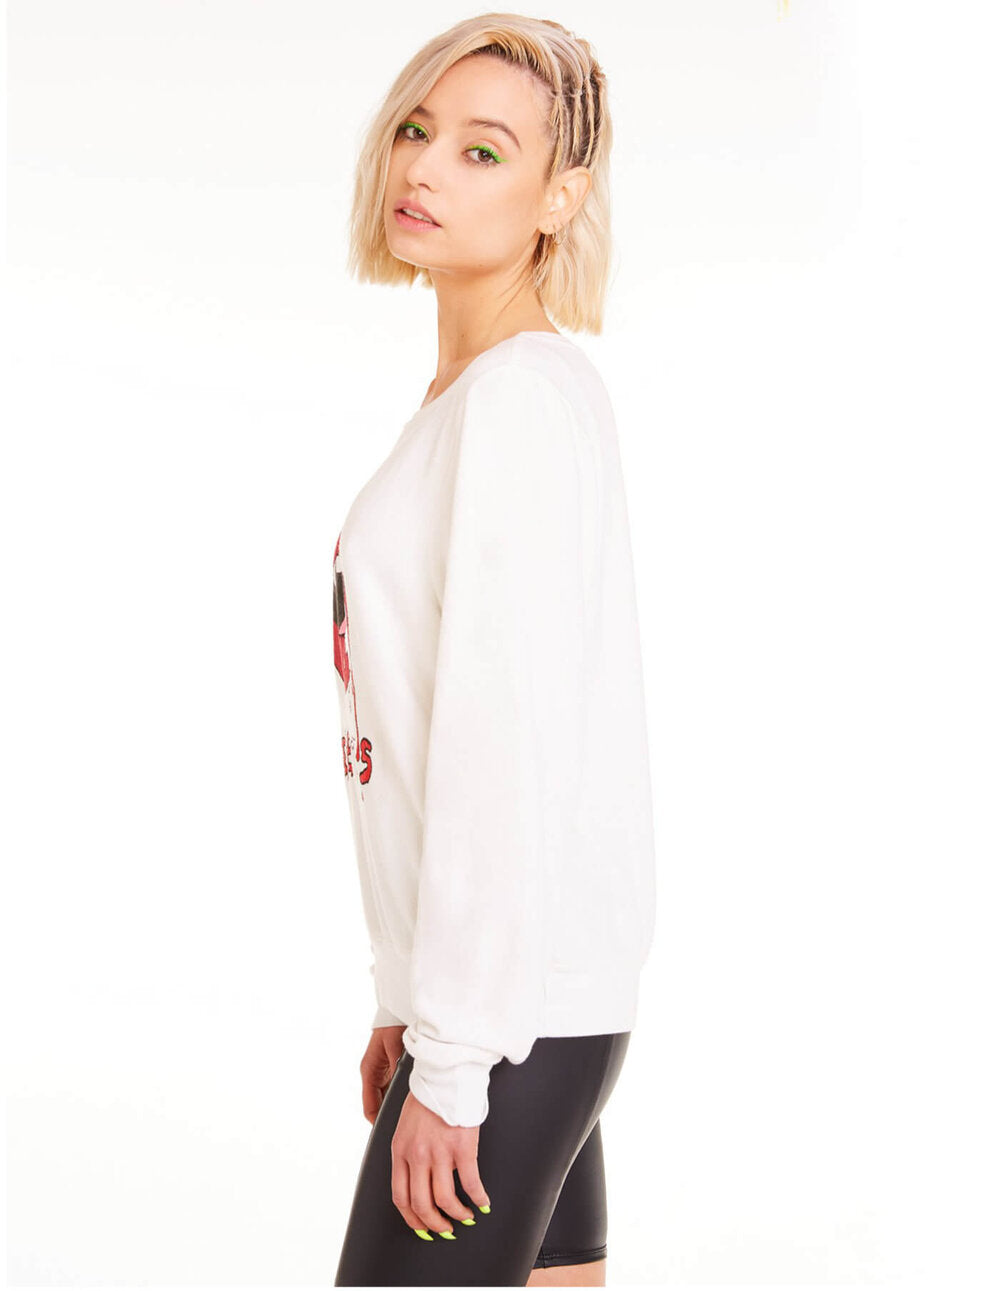 Chic Statement Casual Long Sleeve Tee